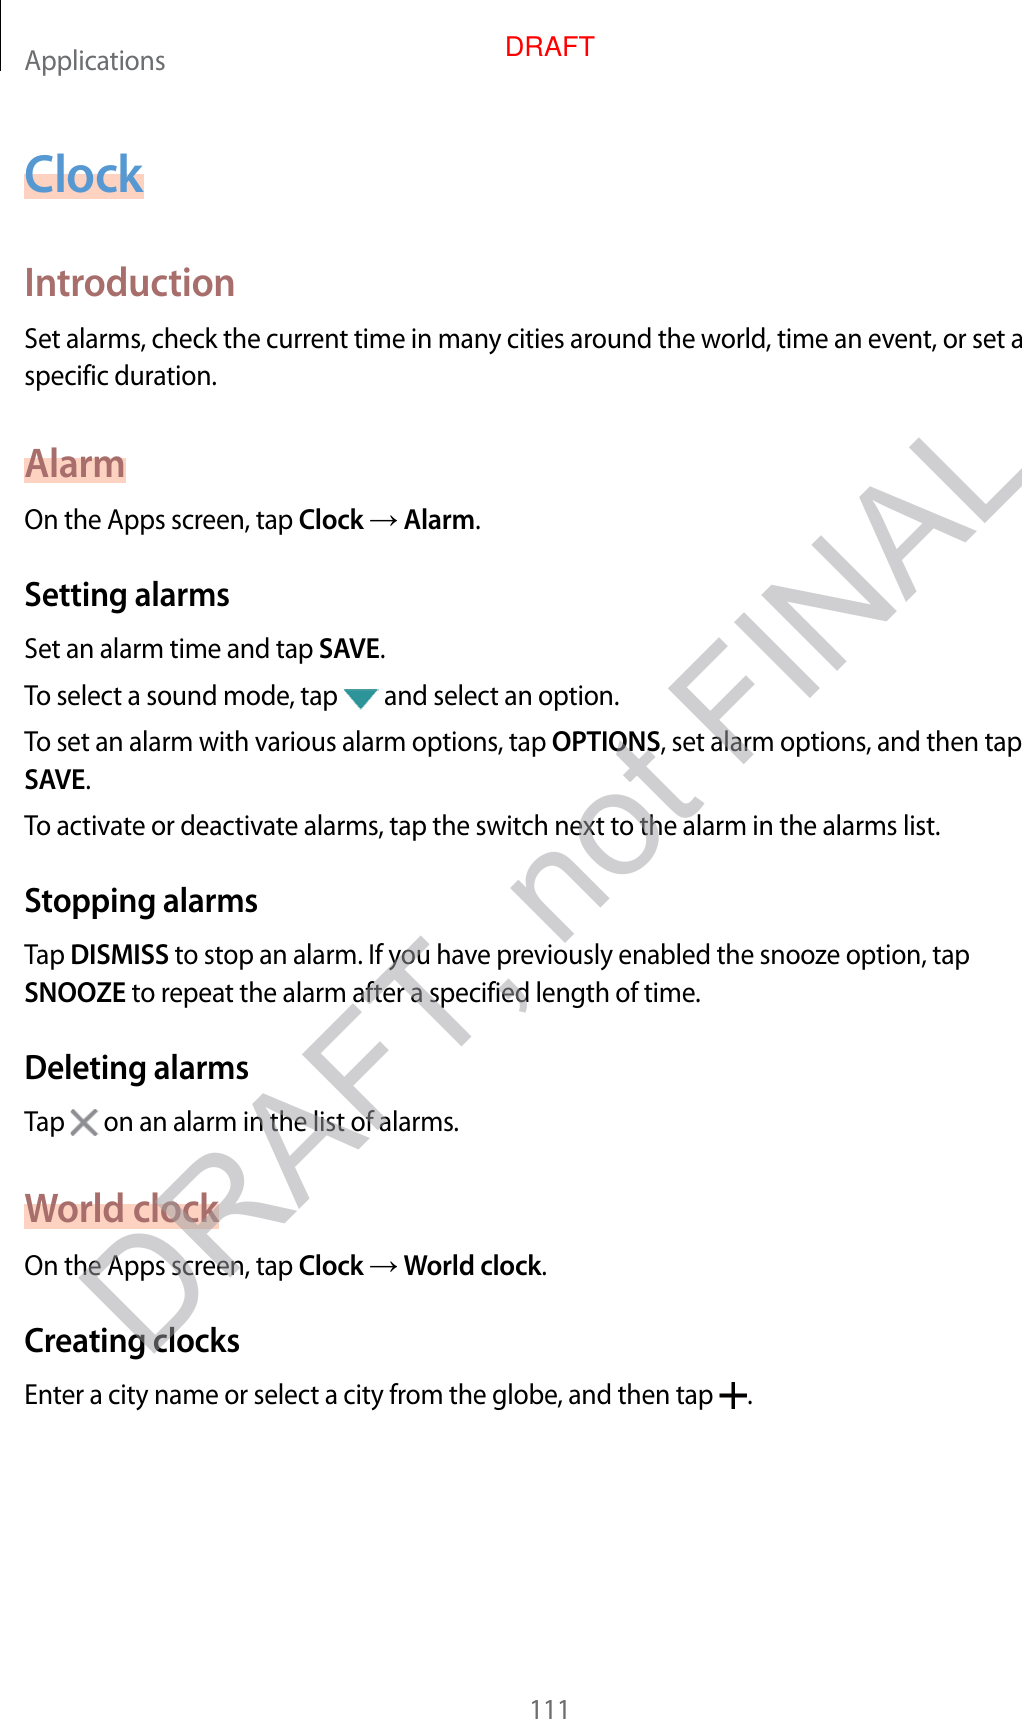 Applications111ClockIntroductionSet alarms, check the current time in many cities around the world, time an event, or set a specific duration.AlarmOn the Apps screen, tap Clock  Alarm.Setting alarmsSet an alarm time and tap SAVE.To select a sound mode, tap   and select an option.To set an alarm with various alarm options, tap OPTIONS, set alarm options, and then tap SAVE.To activate or deactivate alarms, tap the switch next to the alarm in the alarms list.Stopping alarmsTap DISMISS to stop an alarm. If you have previously enabled the snooze option, tap SNOOZE to repeat the alarm after a specified length of time.Deleting alarmsTap   on an alarm in the list of alarms.World clockOn the Apps screen, tap Clock  World clock.Creating clocksEnter a city name or select a city from the globe, and then tap  .DRAFT, not FINALDRAFT